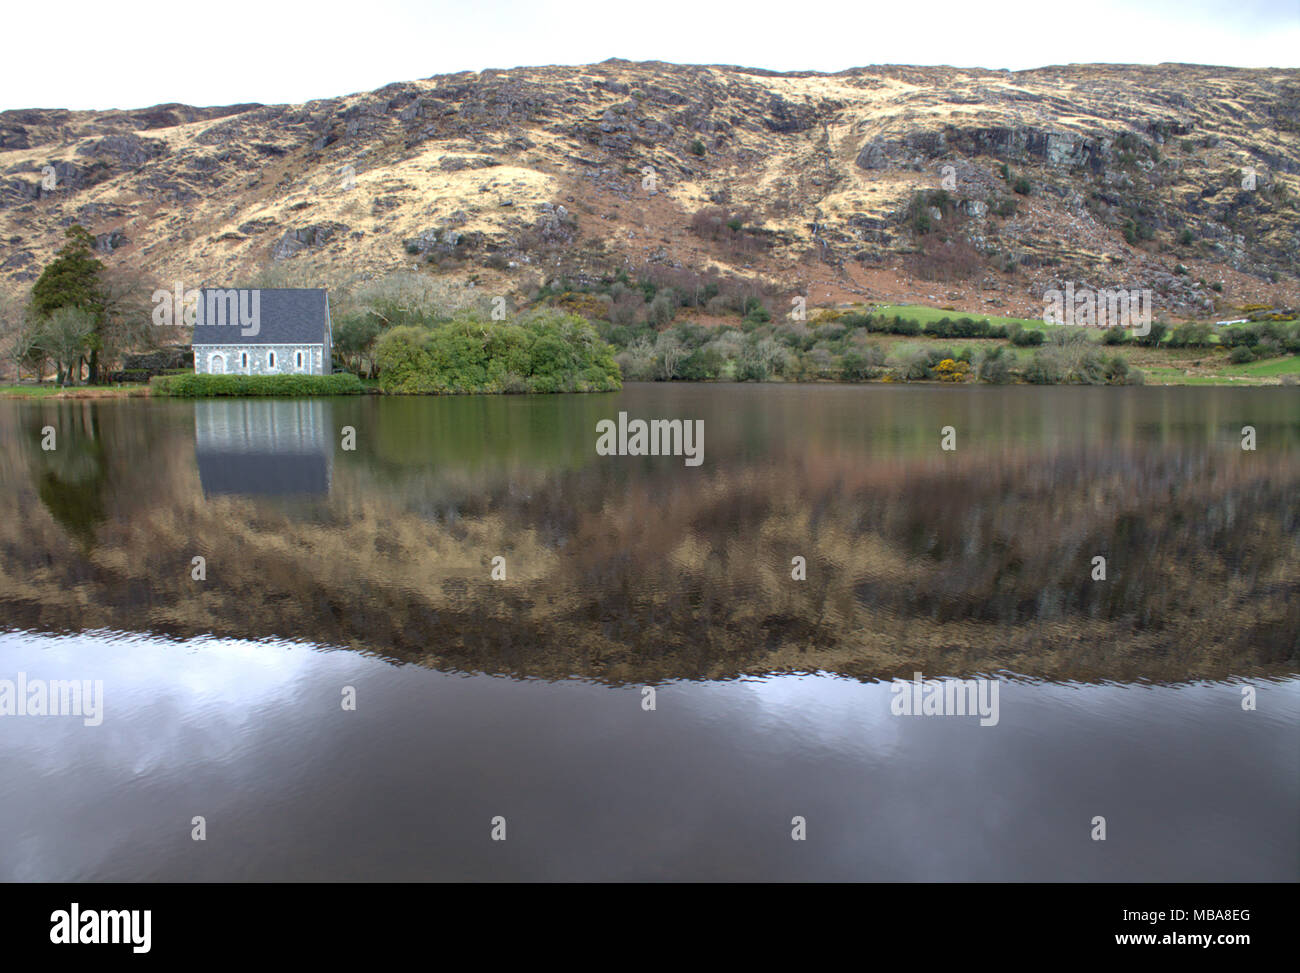 gougane barra church and  shrine of Saint Finbarr, the first bishop of cork, reflected in the atmospheric lake surrounding the church. Stock Photo